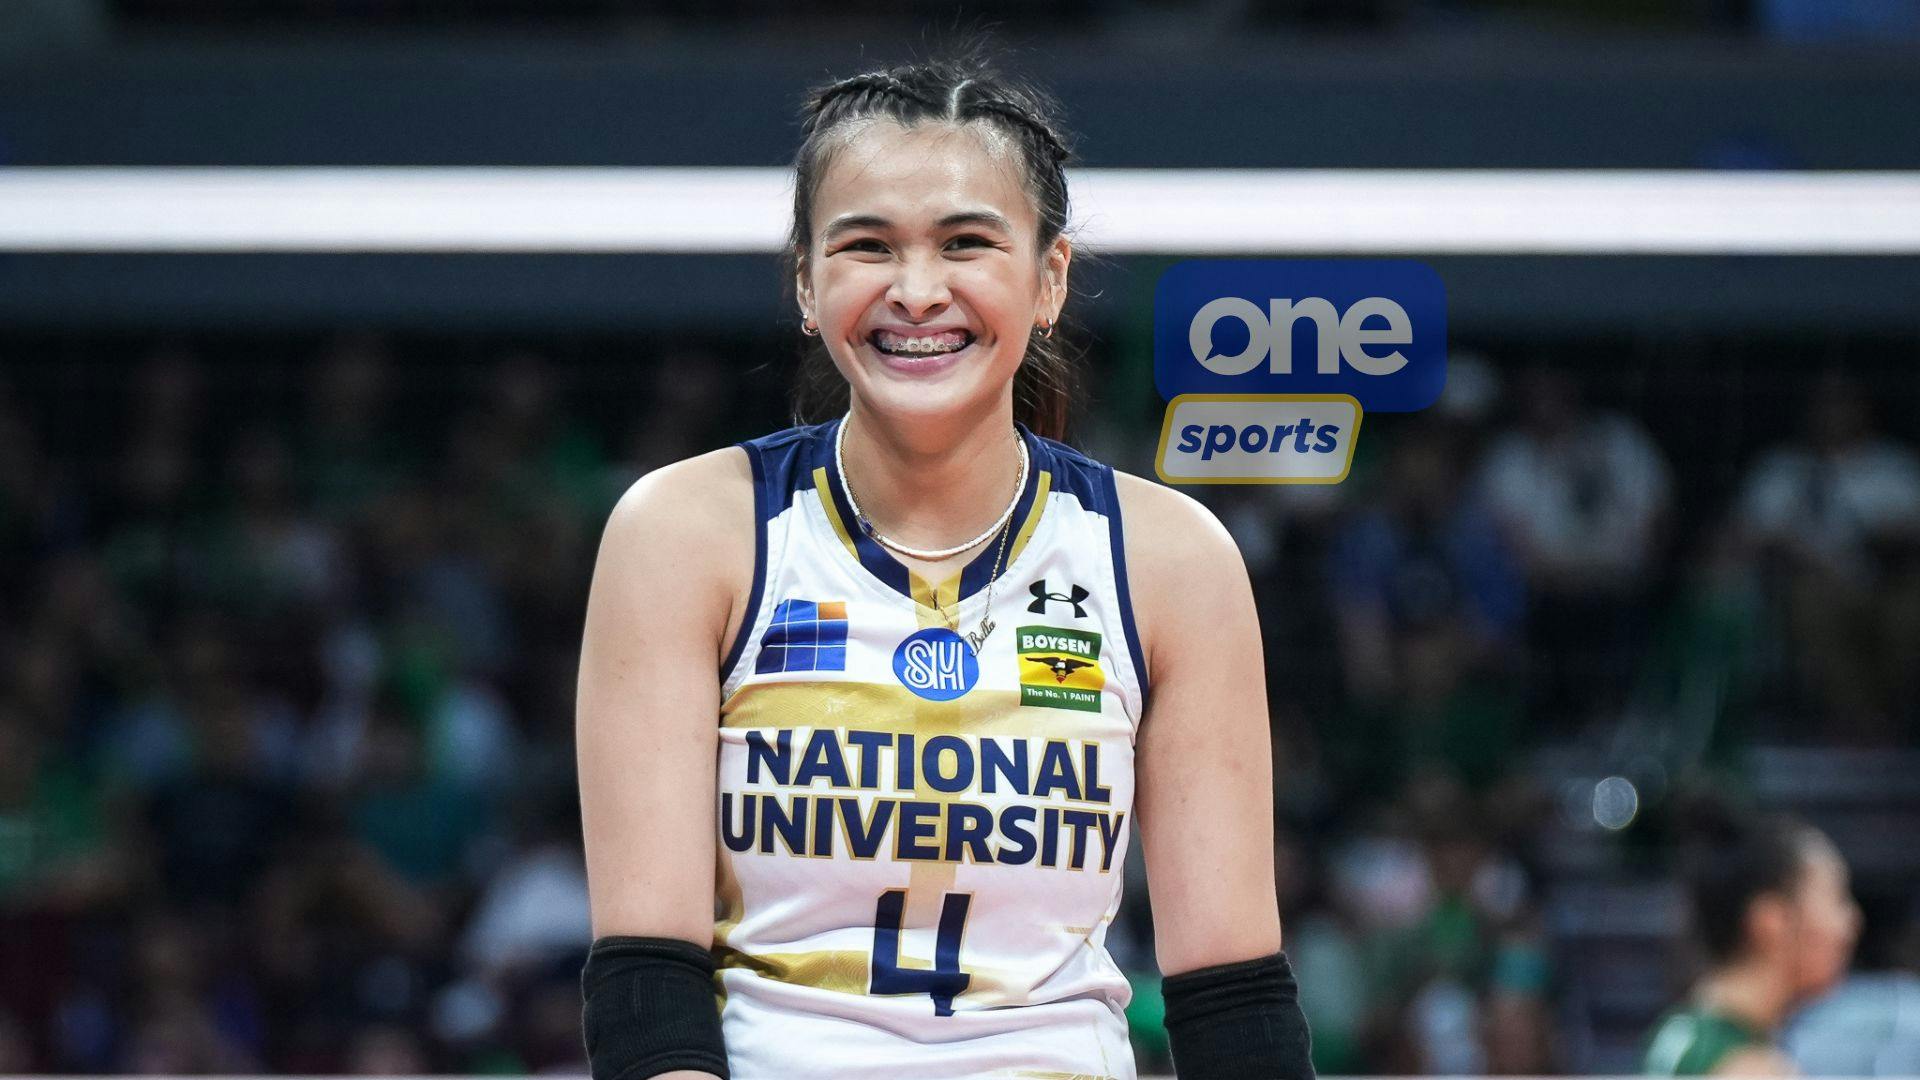 UAAP: Back pain not a hindrance for Bella Belen in giving her all for NU